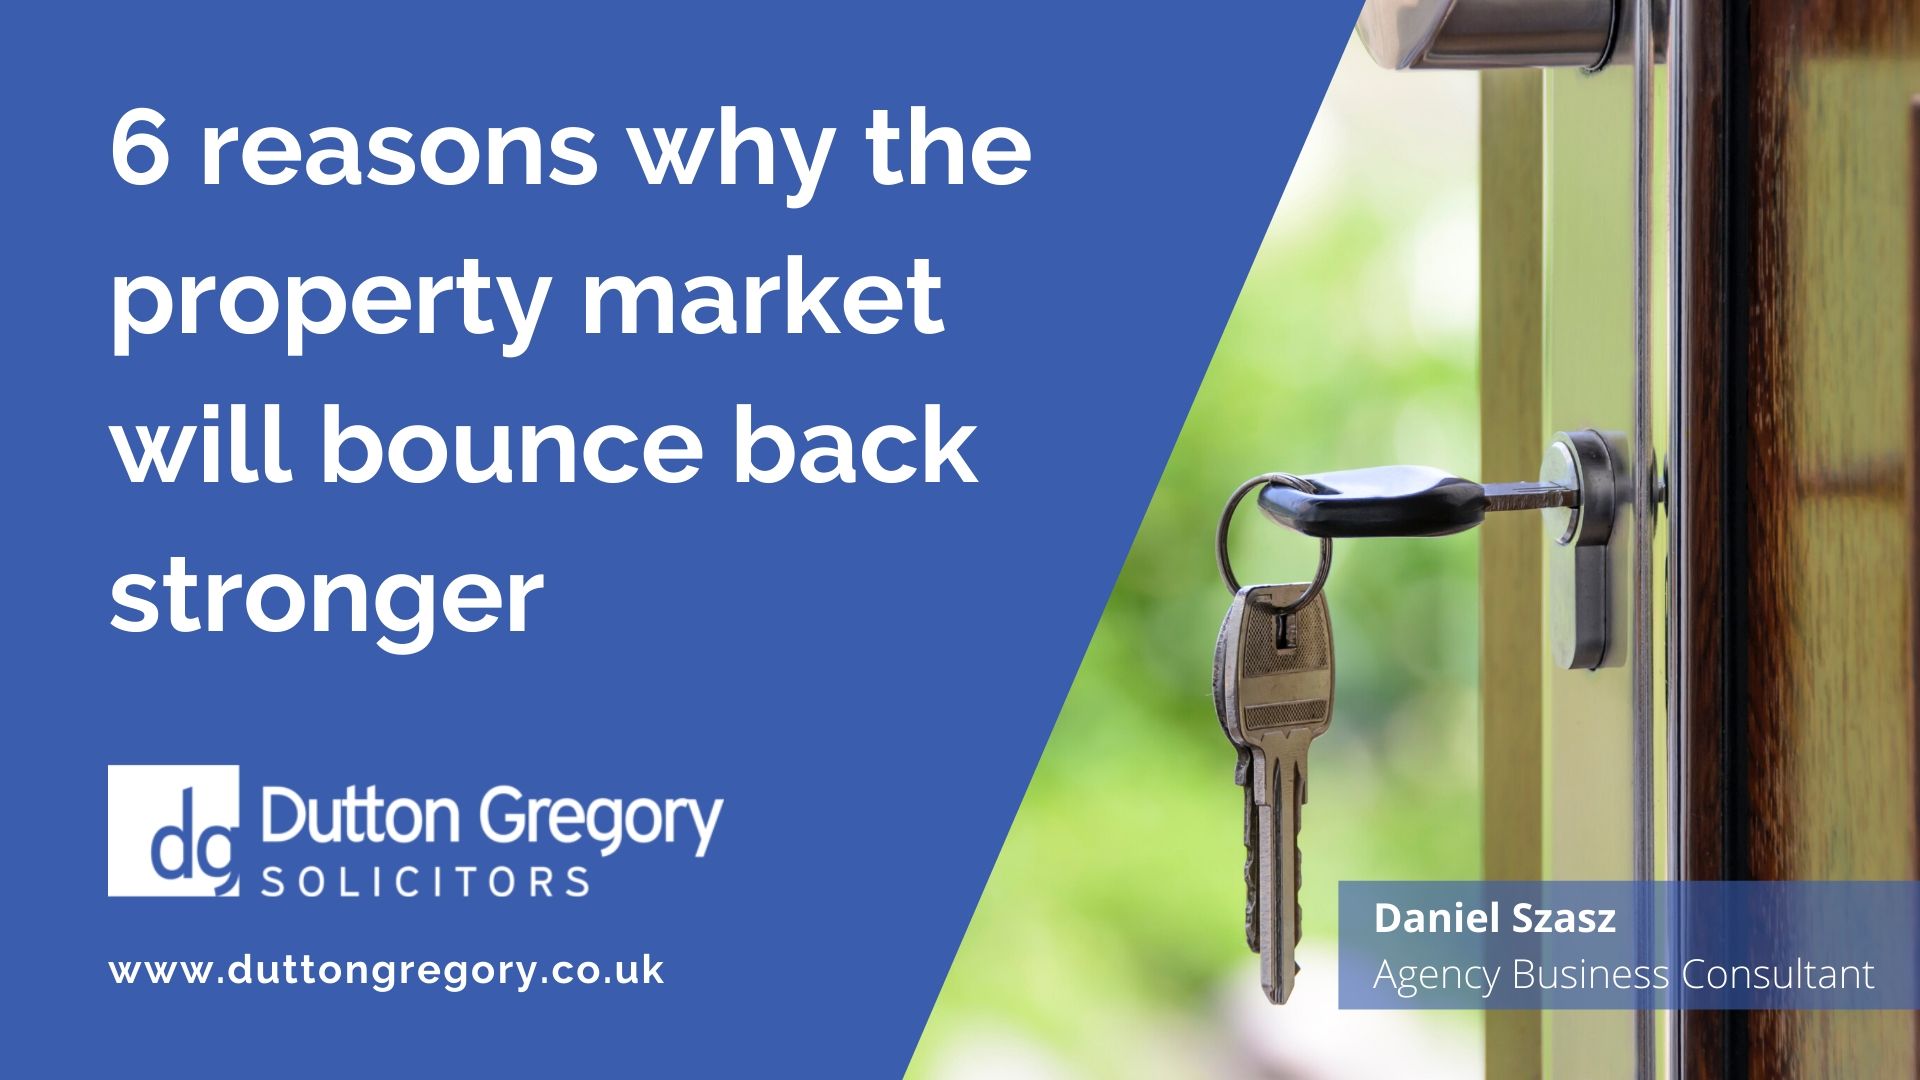 6 reasons why the property market will bounce back stronger